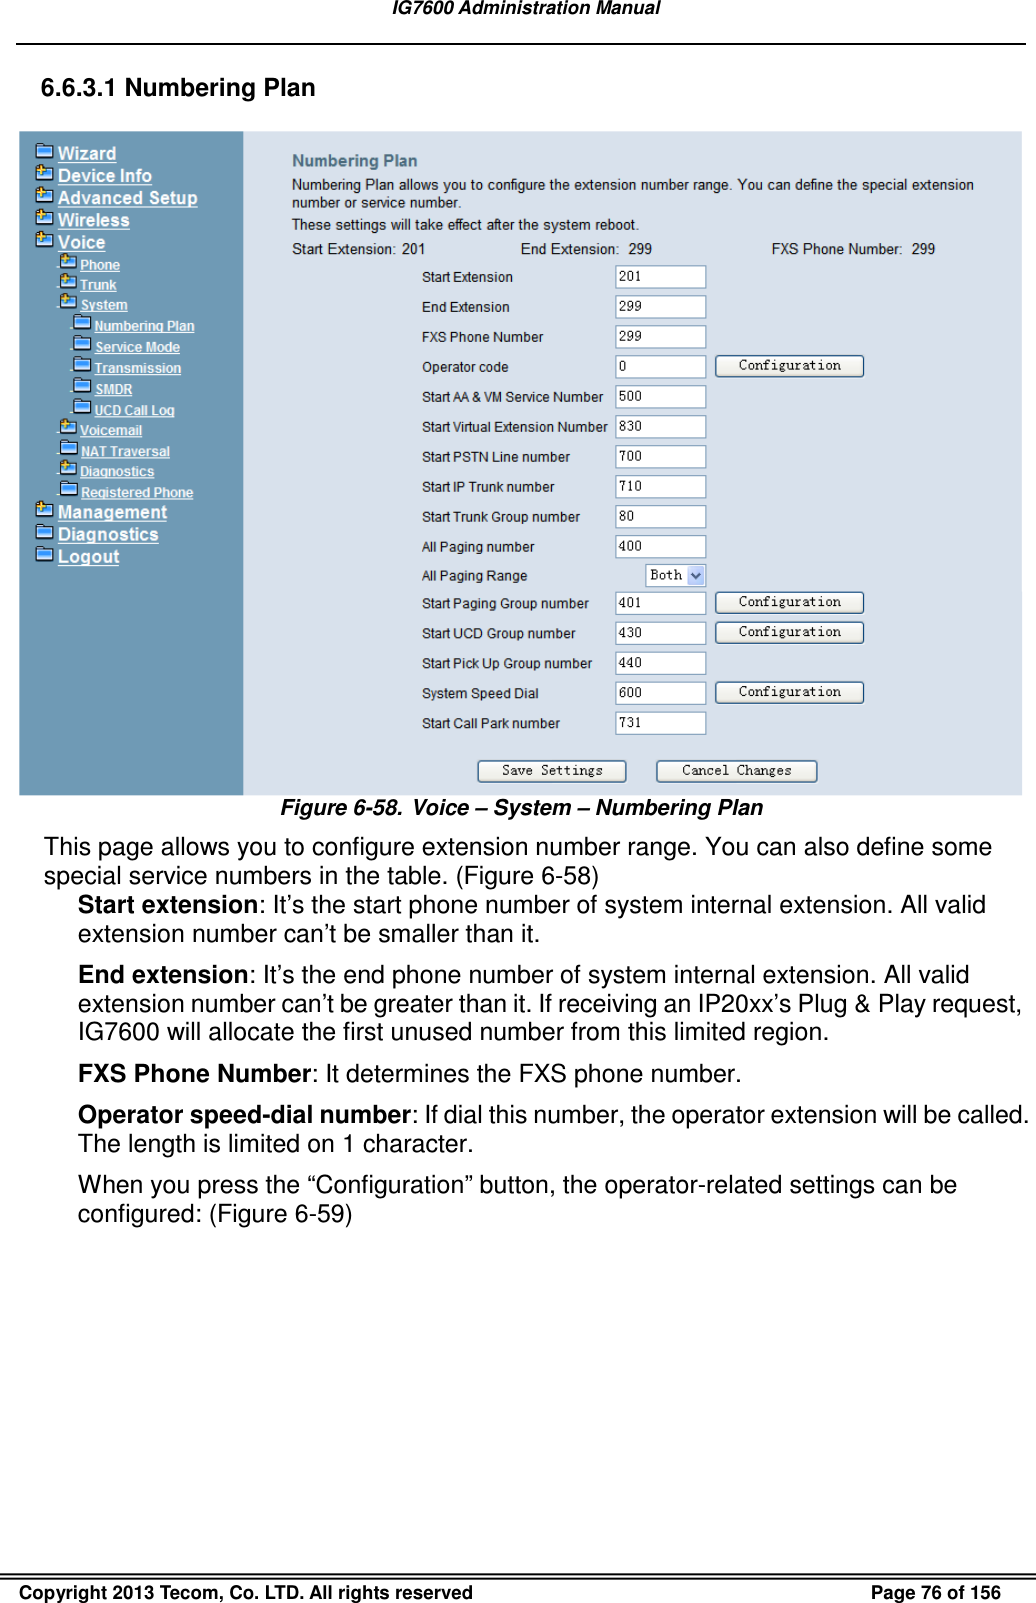   IG7600 Administration Manual  Copyright 2013 Tecom, Co. LTD. All rights reserved  Page 76 of 156 6.6.3.1 Numbering Plan  Figure 6-58.  Voice – System – Numbering Plan This page allows you to configure extension number range. You can also define some special service numbers in the table. (Figure 6-58) Start extension: It’s the start phone number of system internal extension. All valid extension number can’t be smaller than it. End extension: It’s the end phone number of system internal extension. All valid extension number can’t be greater than it. If receiving an IP20xx’s Plug &amp; Play request, IG7600 will allocate the first unused number from this limited region.   FXS Phone Number: It determines the FXS phone number. Operator speed-dial number: If dial this number, the operator extension will be called. The length is limited on 1 character. When you press the “Configuration” button, the operator-related settings can be configured: (Figure 6-59) 